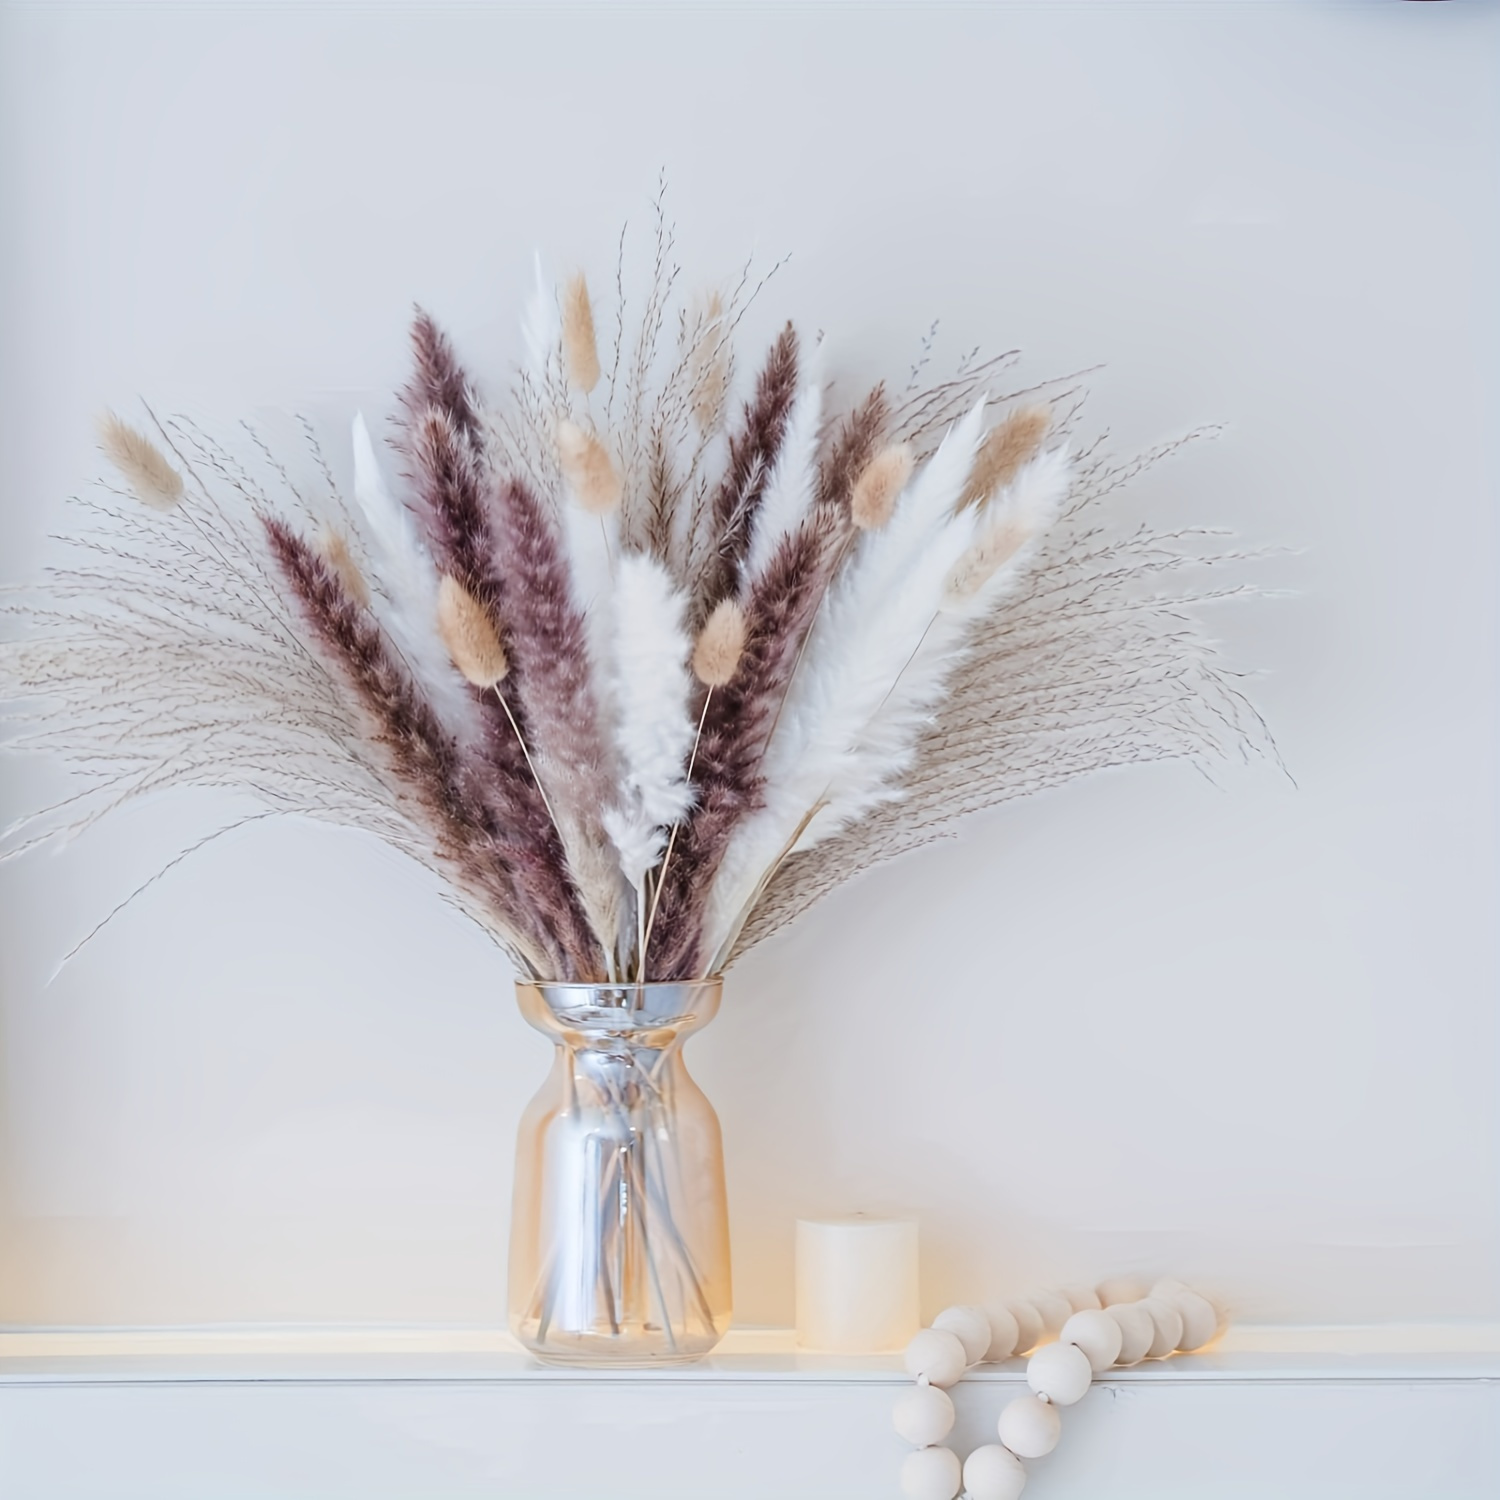 

60pcs Natural Rattan Dried Pampas Grass Bundle With Bunny Tails, Boho Wedding & Home Table Decor, St Patrick's Easter Spring Summer Props